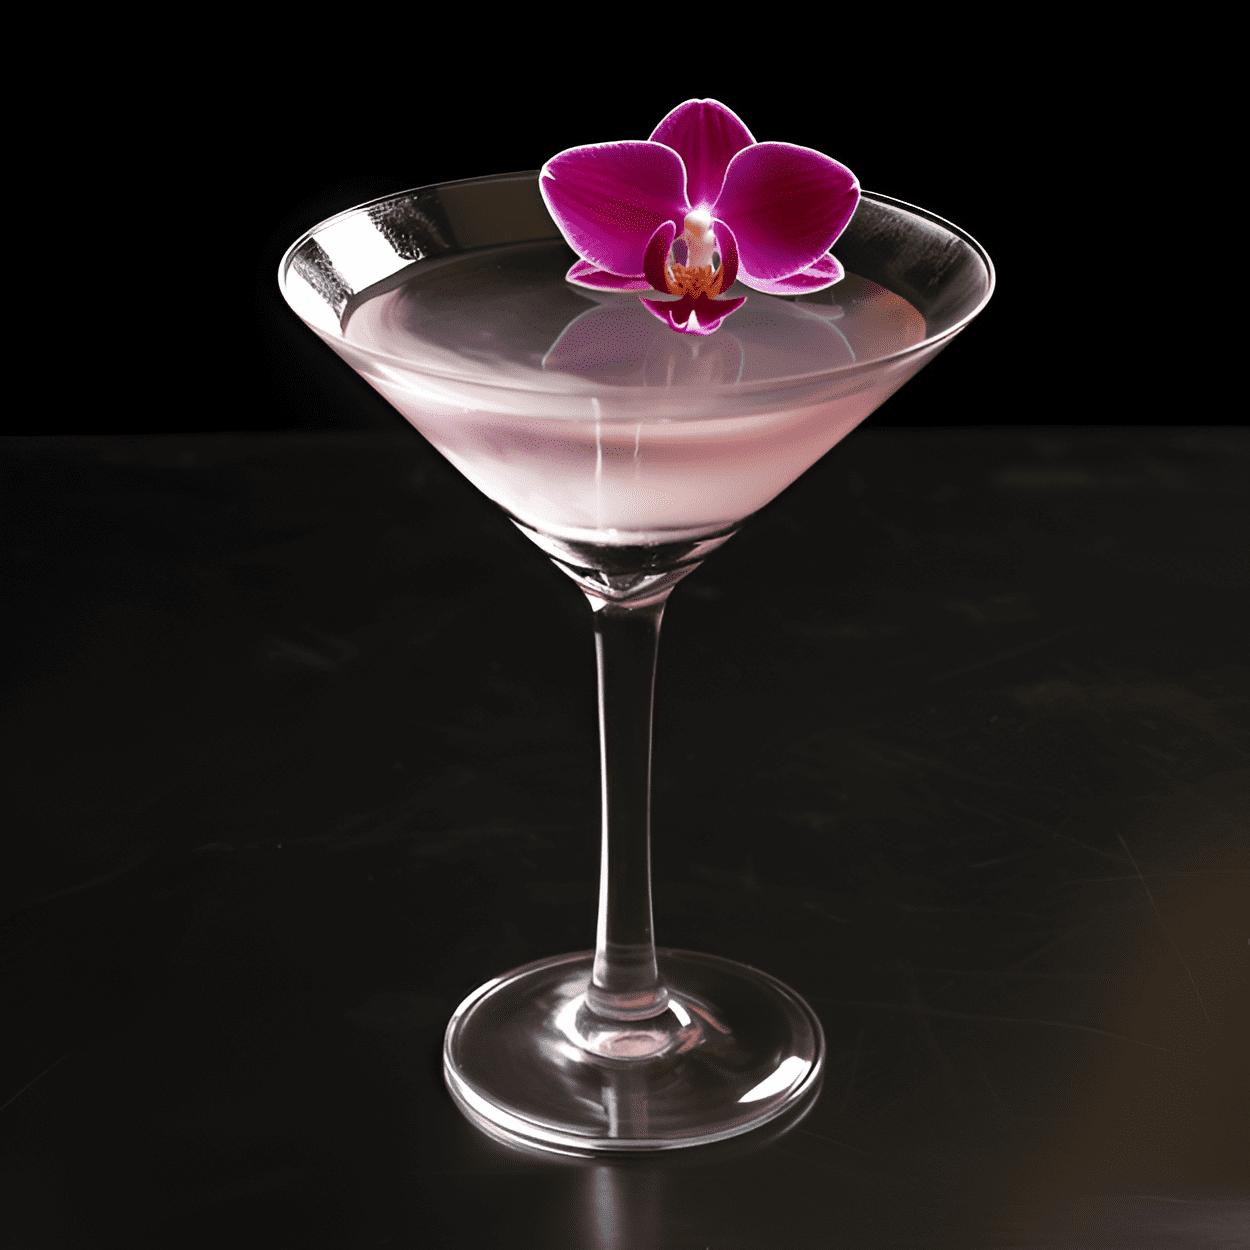 Black Orchid Cocktail Recipe - The Black Orchid has a smooth, fruity, and slightly sweet taste. It's a harmonious blend of the tropical flavors of lychee and lemon, with a hint of vanilla from the vodka. The taste is rounded off with a subtle floral note from the orchid garnish.